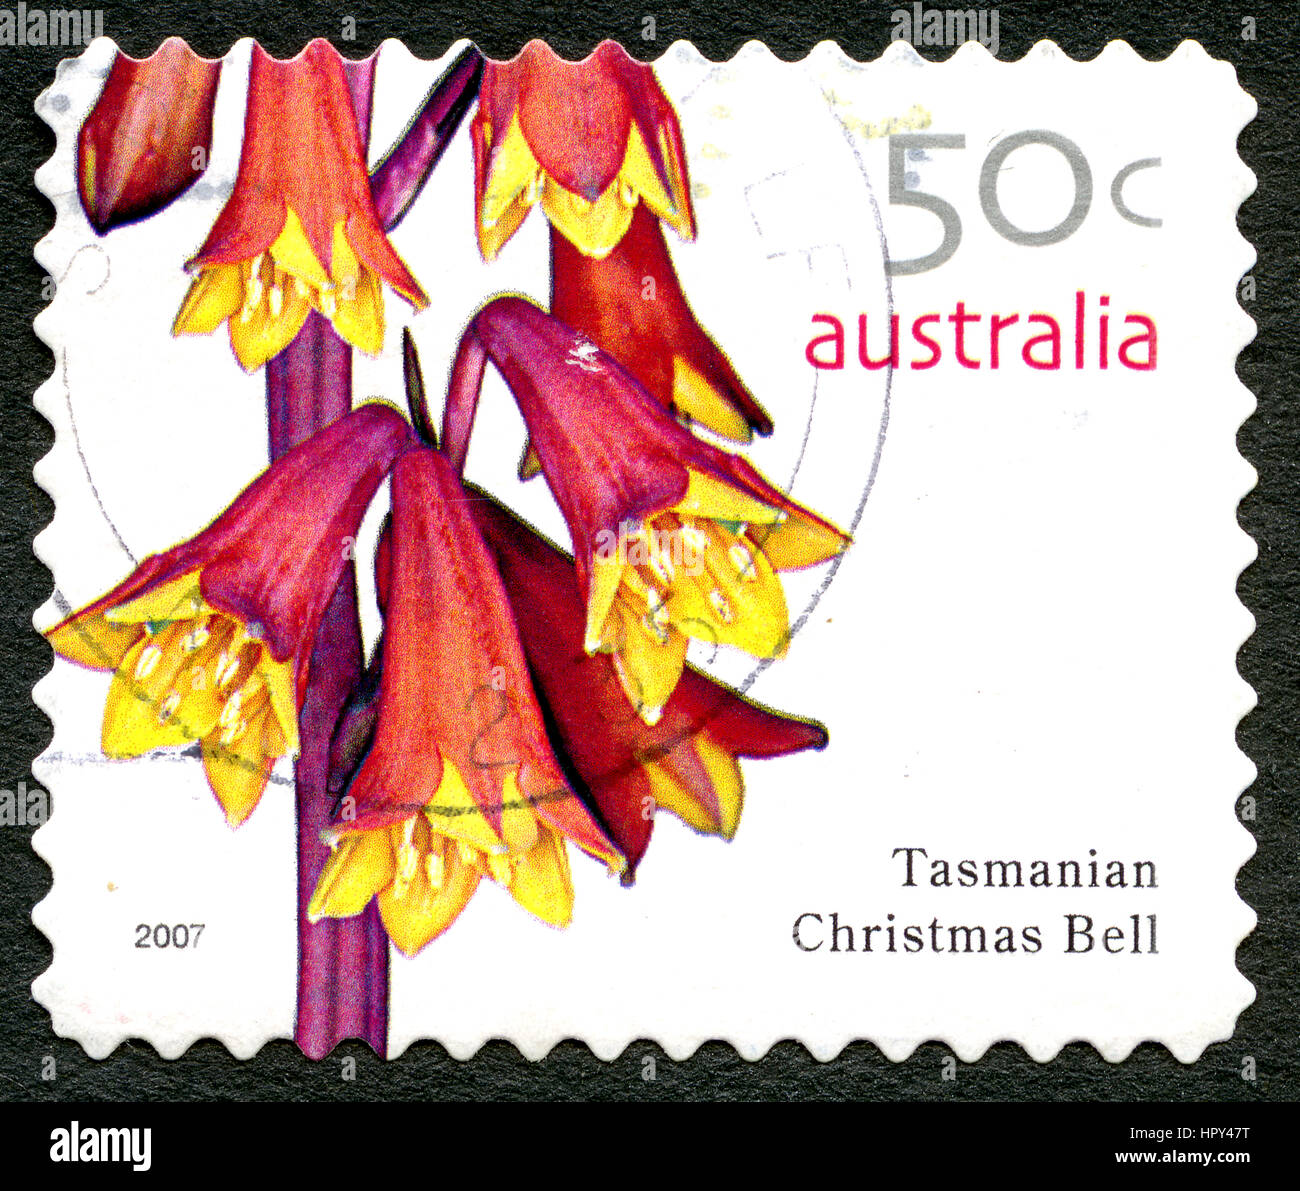 AUSTRALIA - CIRCA 2005: A used postage stamp from Australia, depicting an image of a Tasmanian Christmas Bell flowering plant, circa 2005. Stock Photo